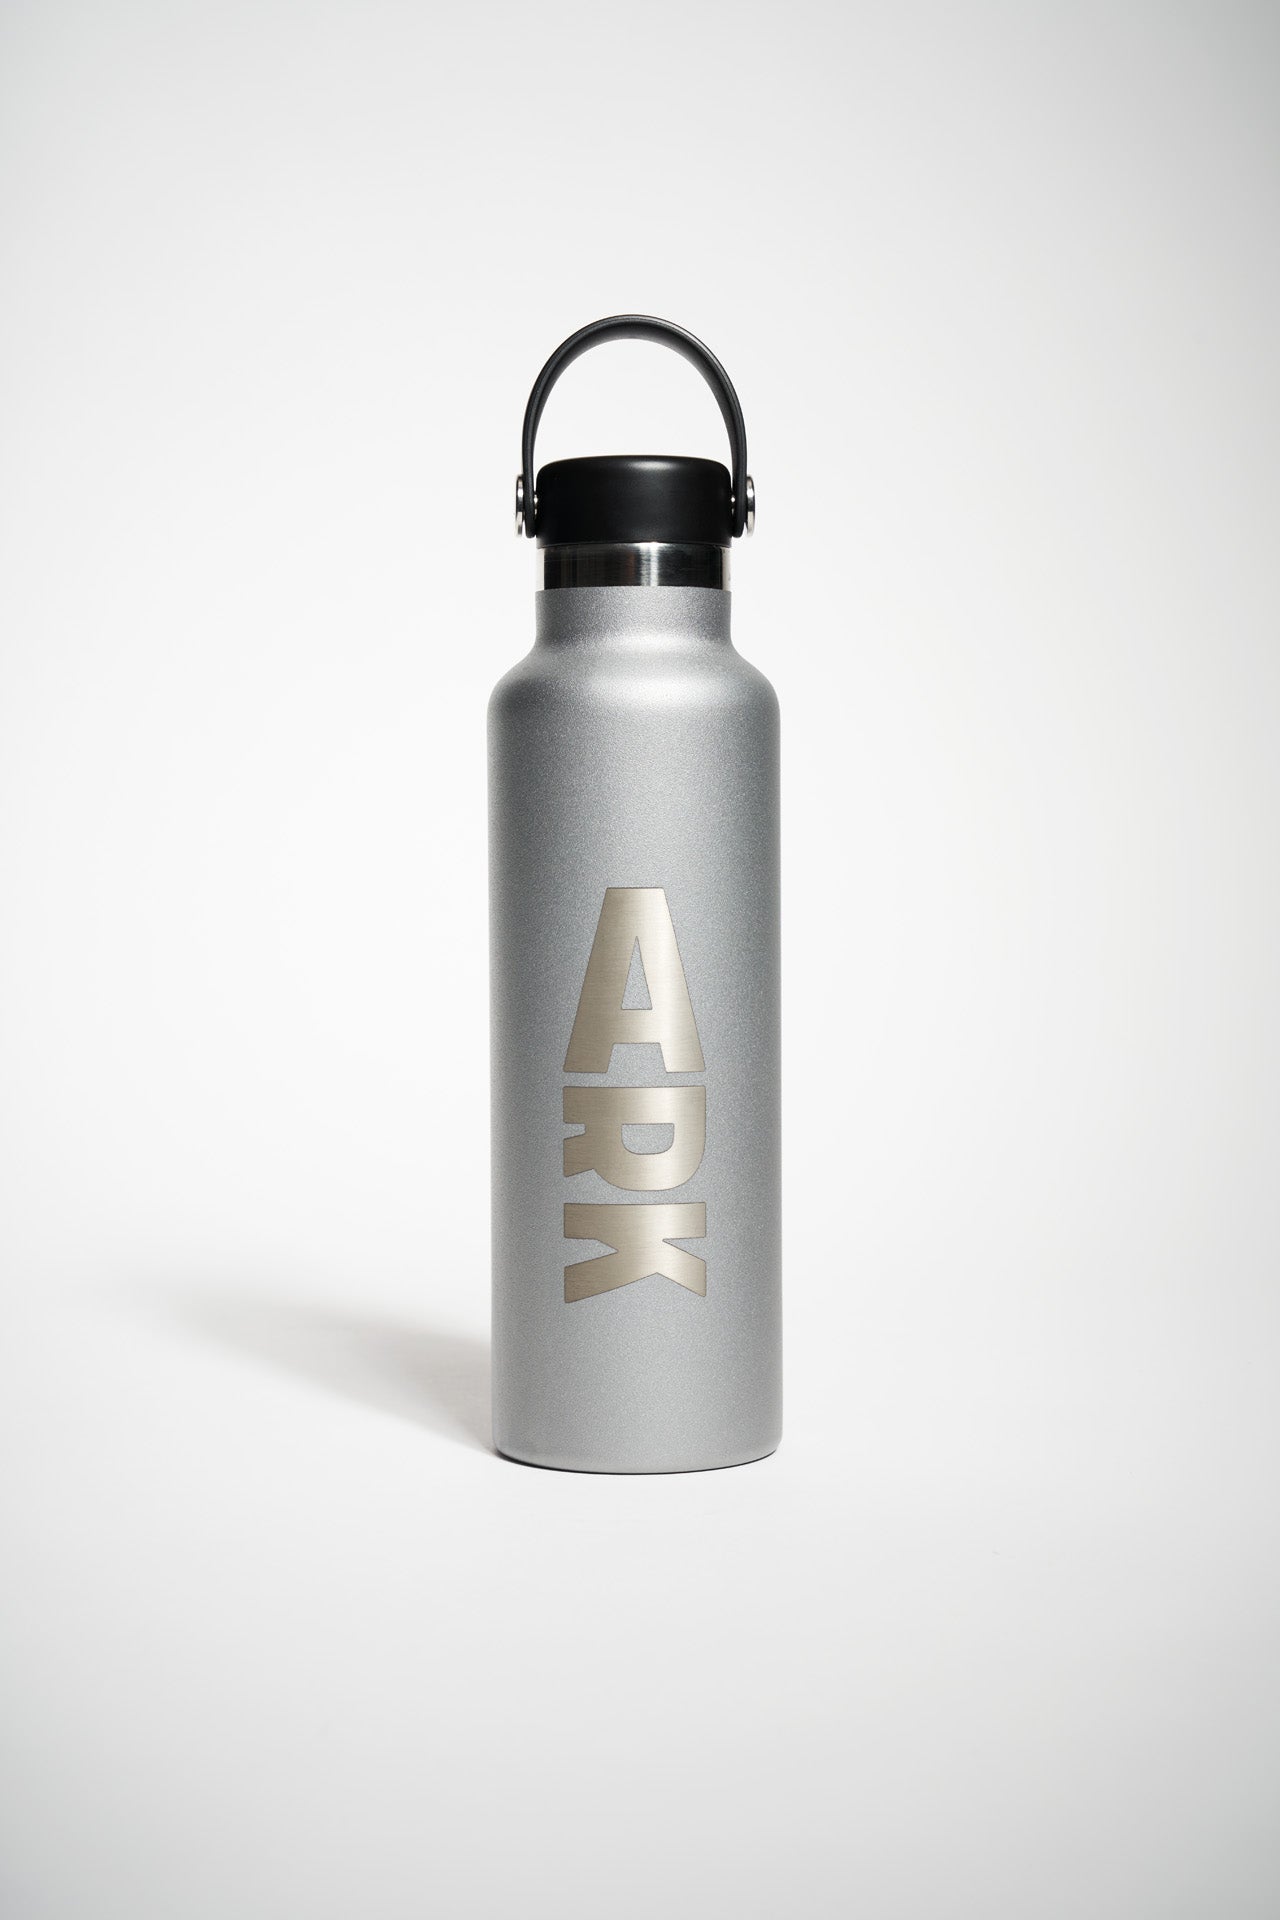 Product photo of ARK Rehydrate Bottle